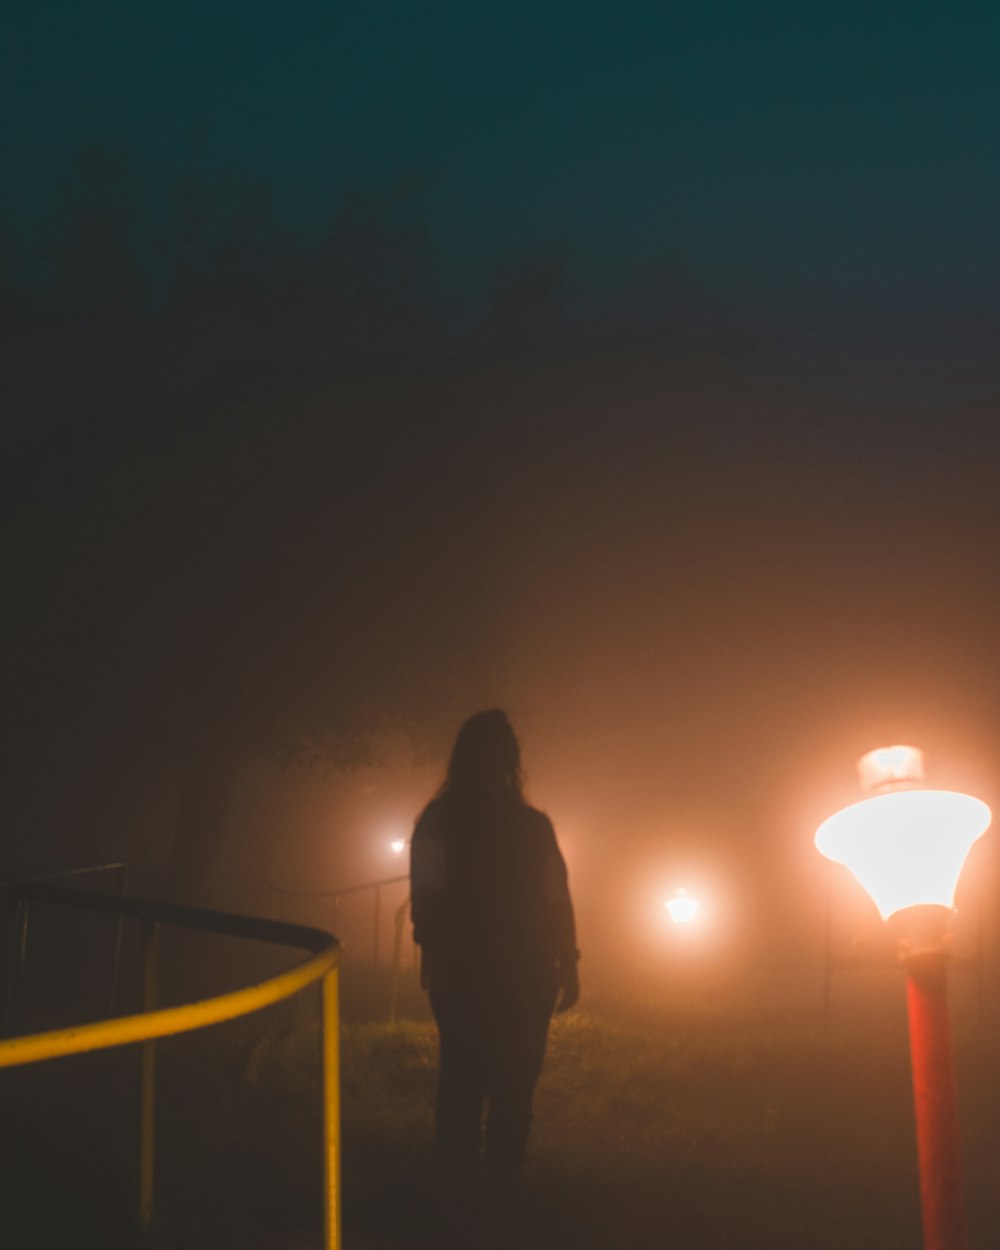 a person standing in a foggy area with street lights